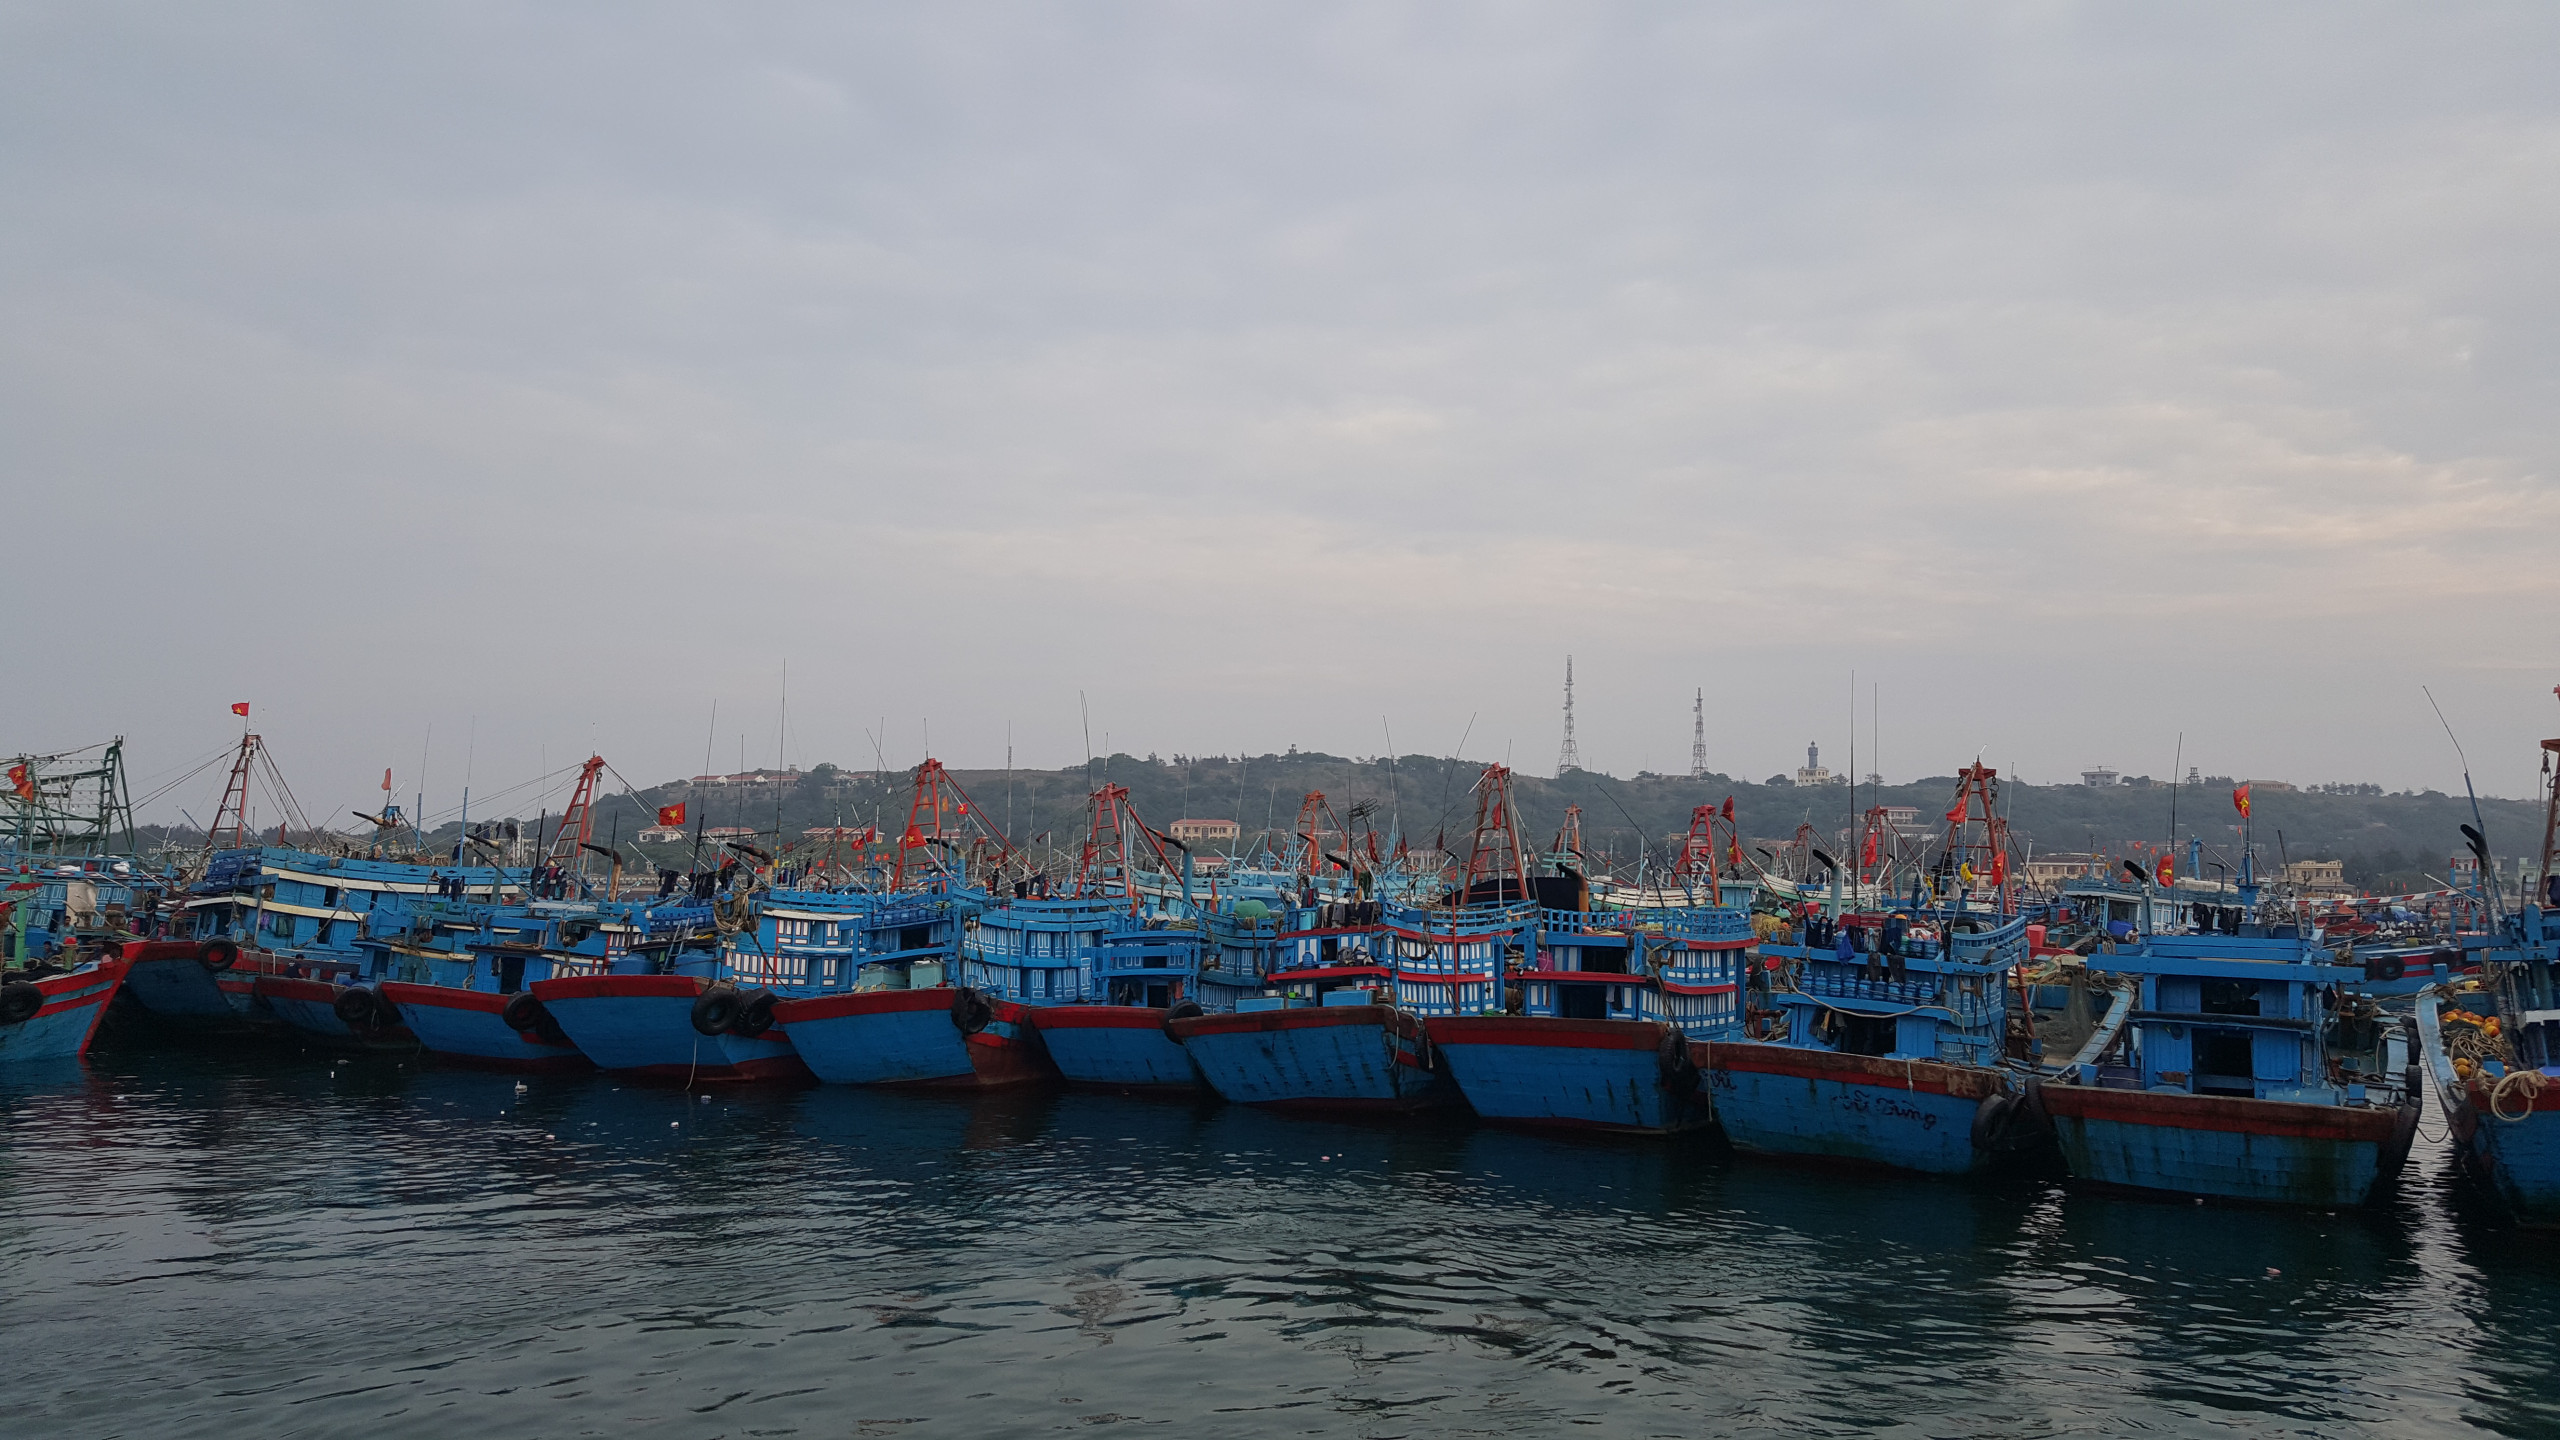 Ca Mau: Calling on fishermen to not violate foreign waters